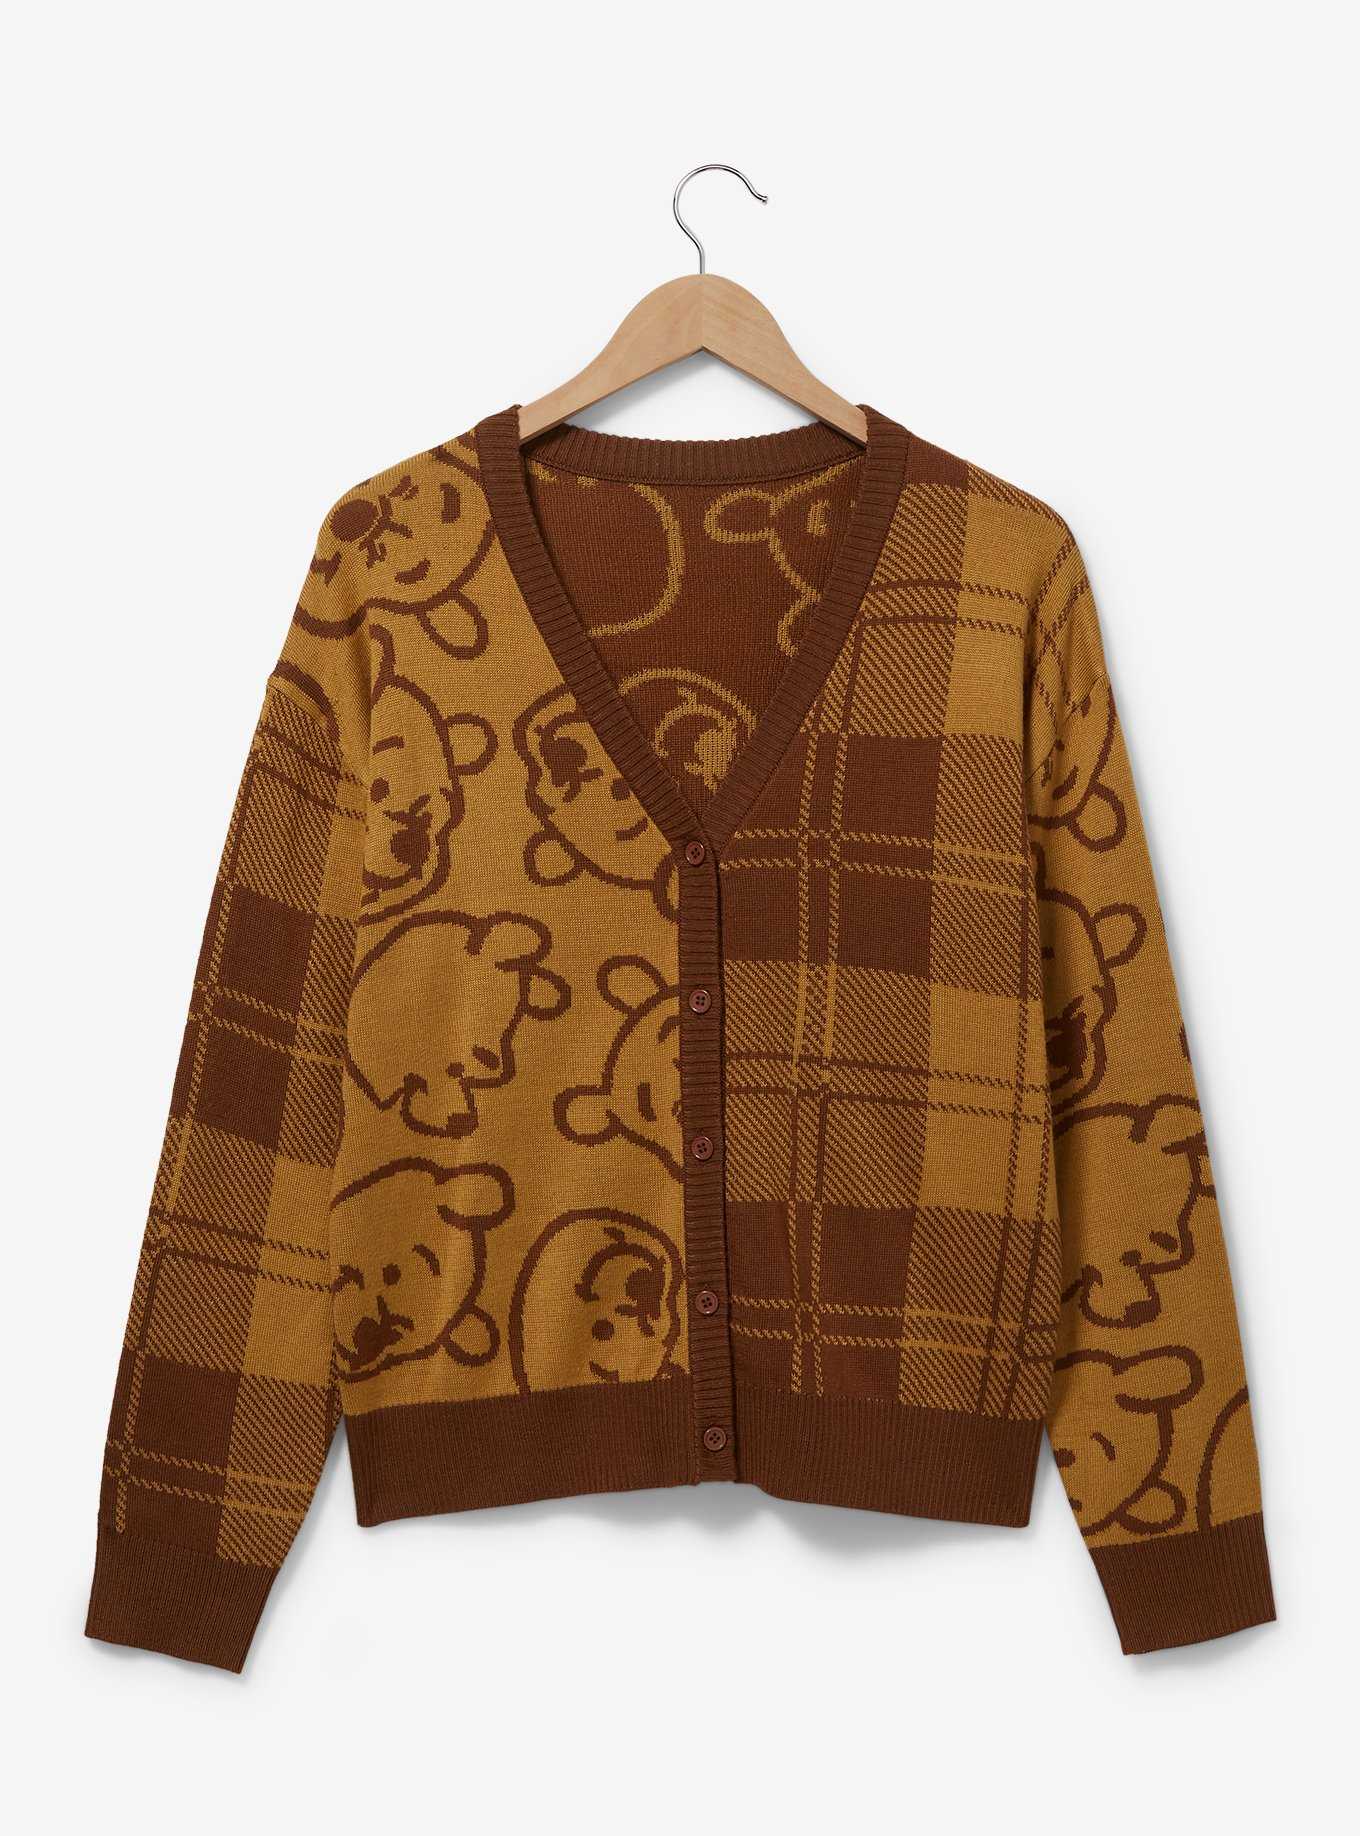 Disney Winnie the Pooh Plaid Pooh Bear Outline Women's Cardigan - BoxLunch Exclusive, , hi-res